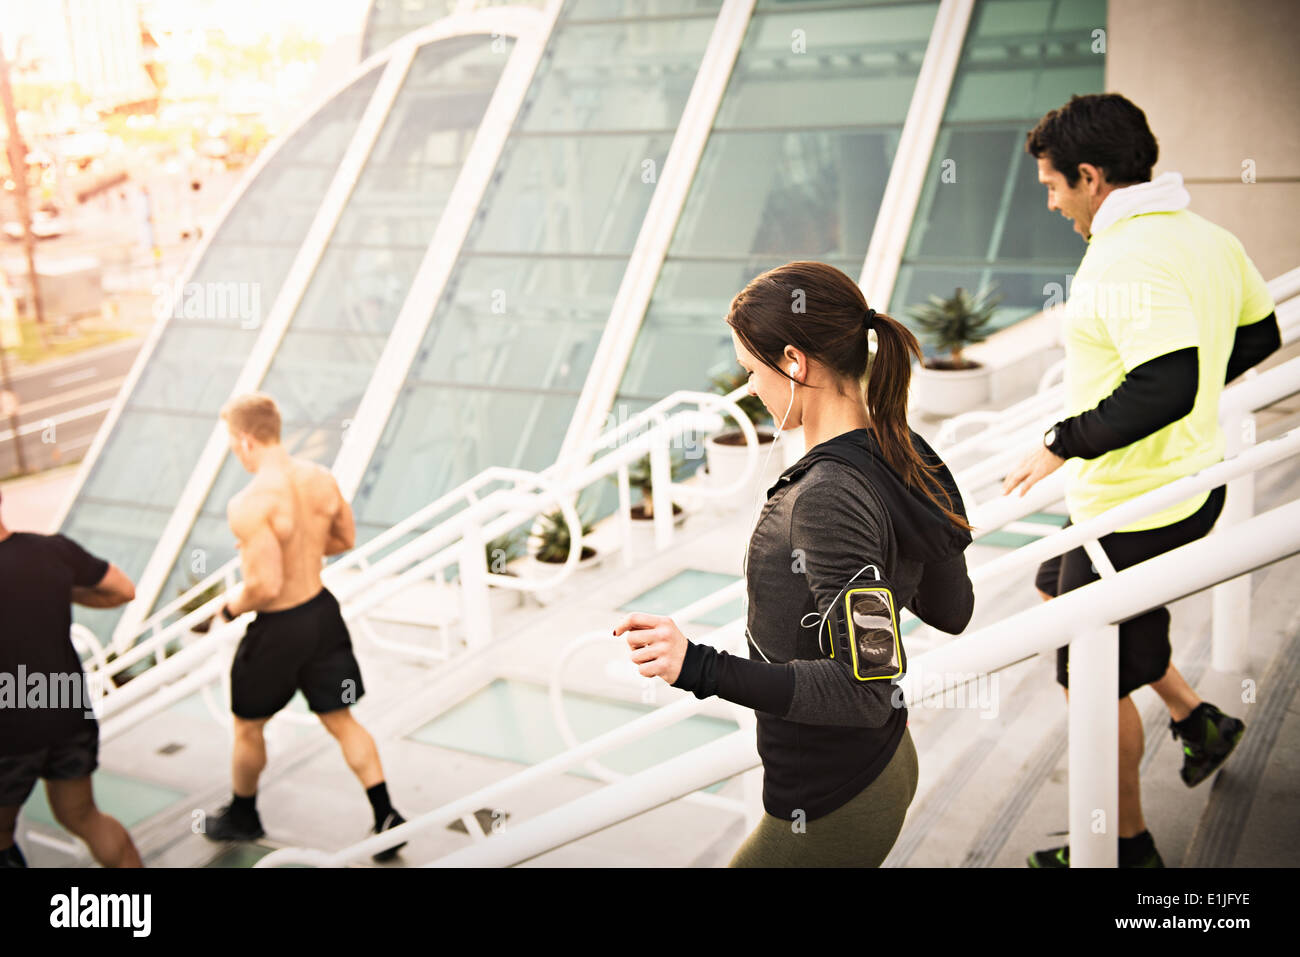 Small group of runners training on convention center steps Stock Photo